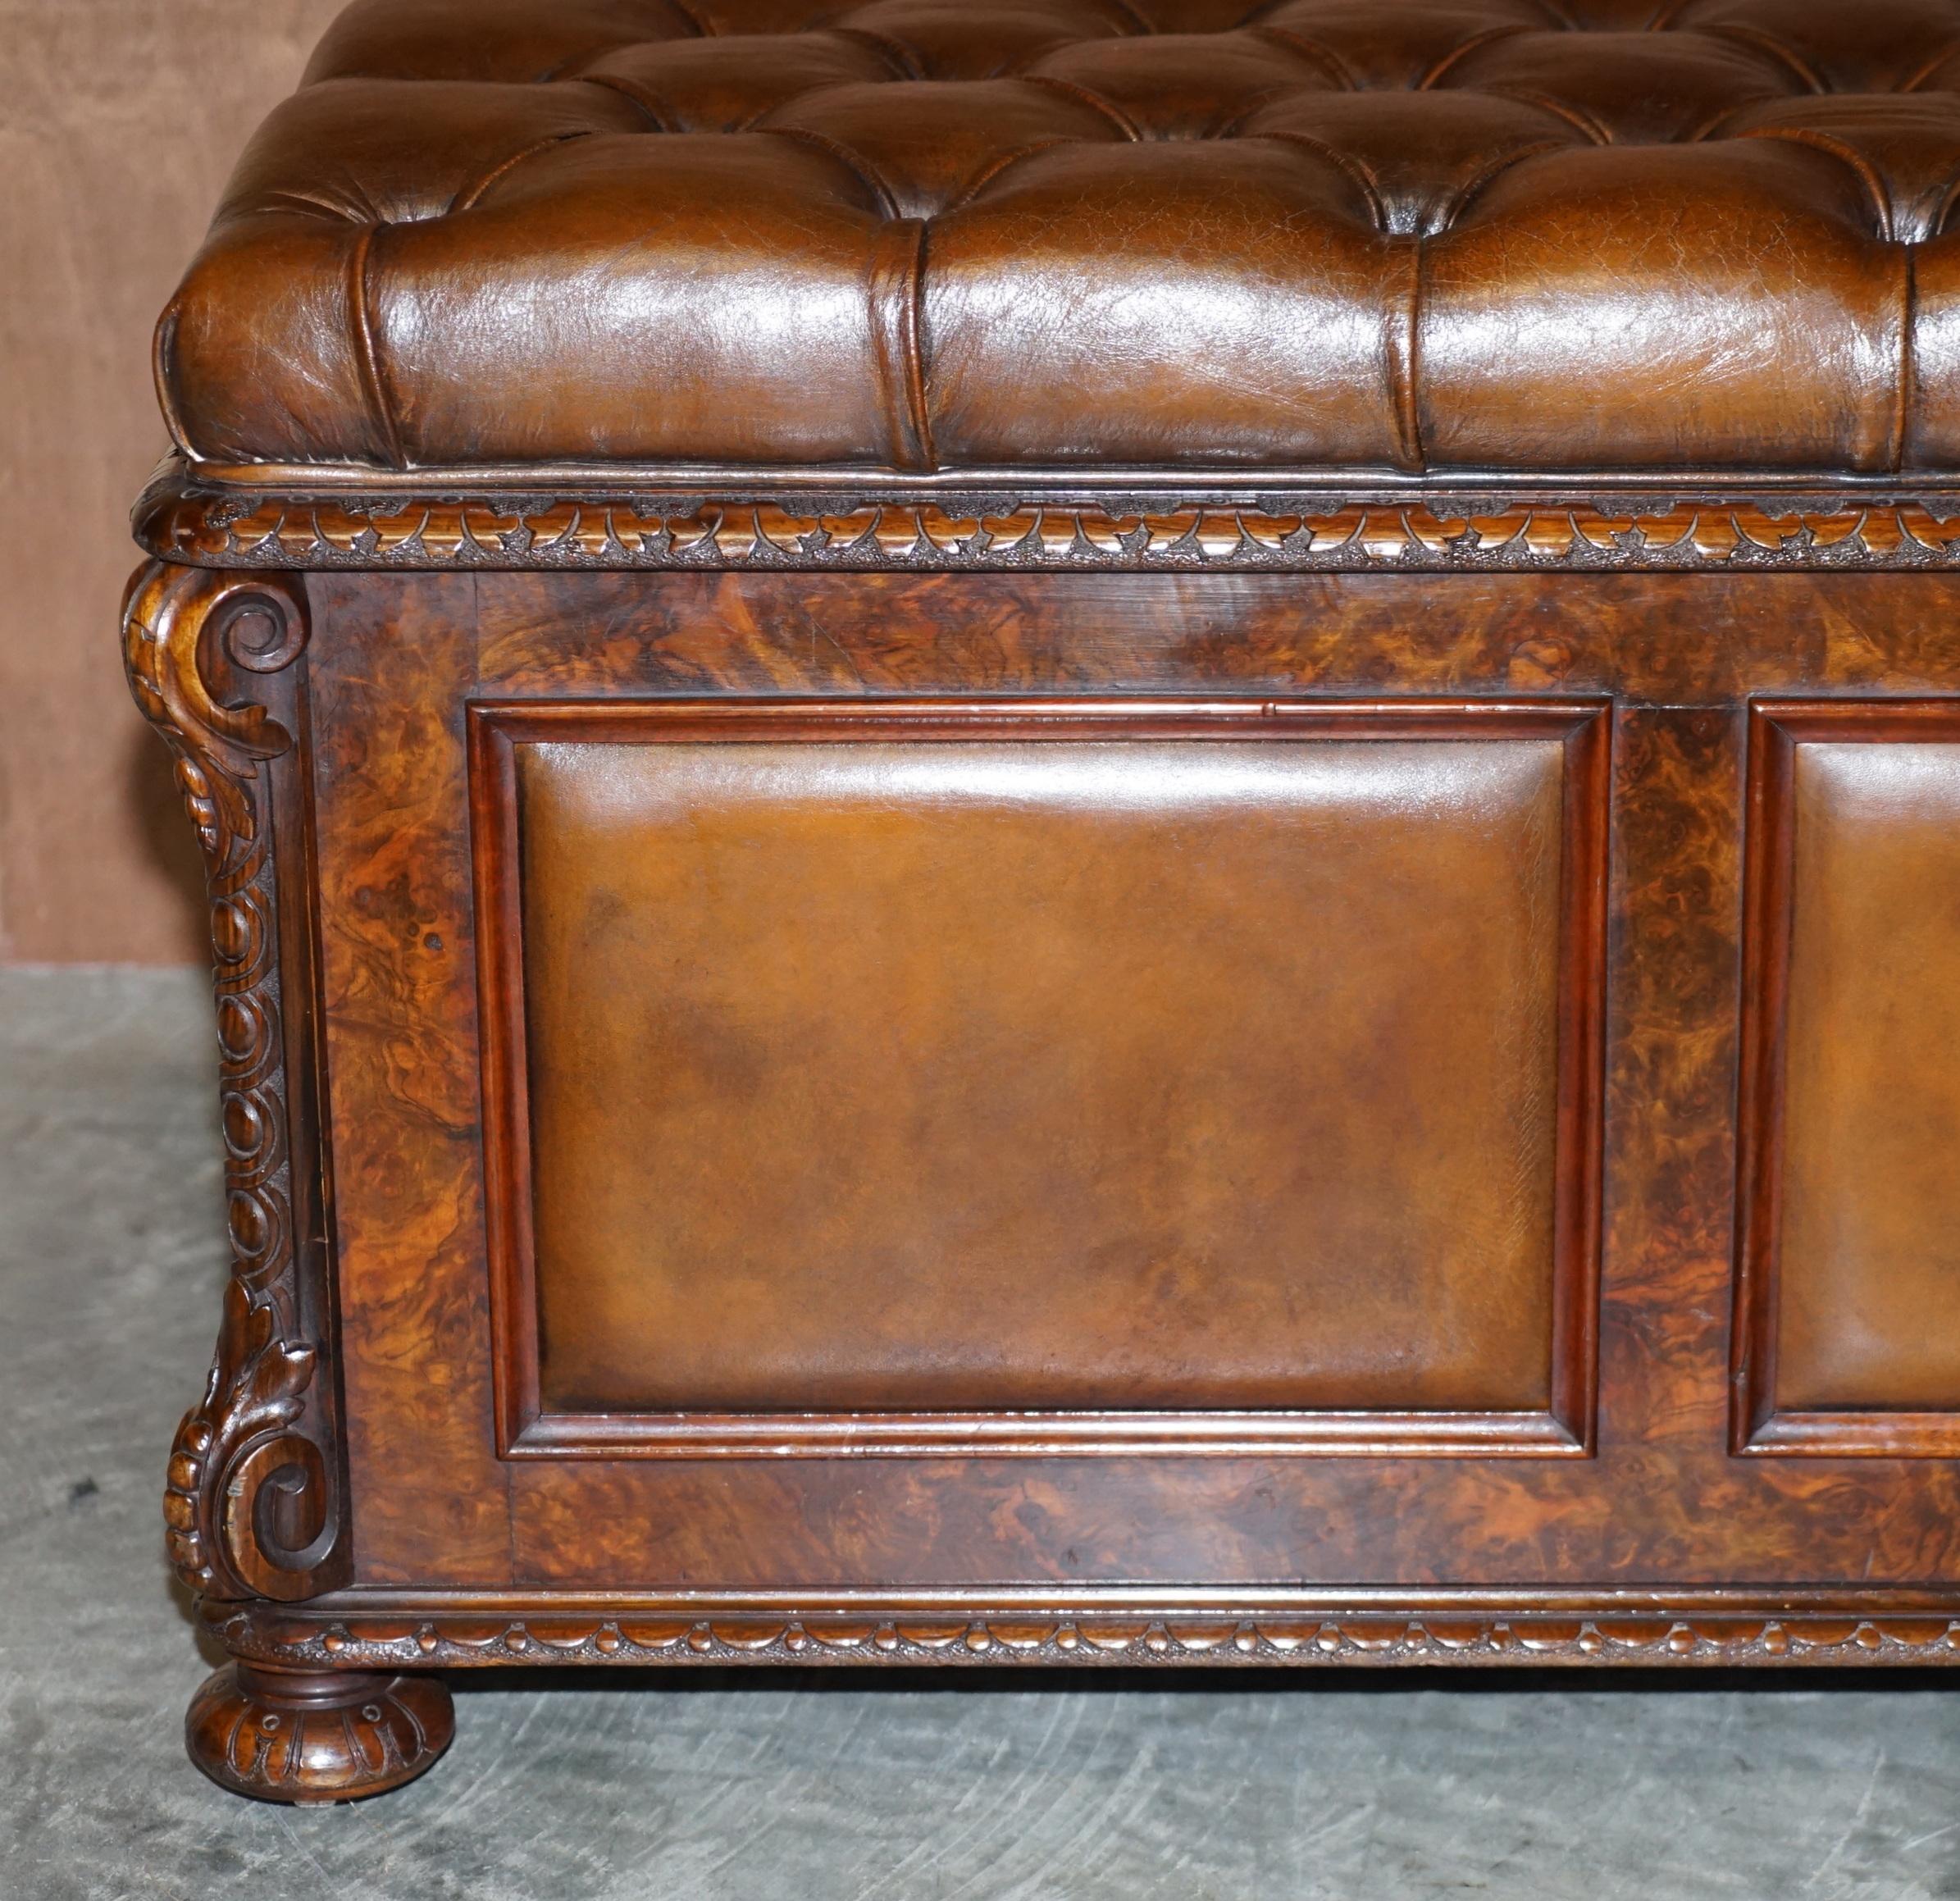 Hand-Crafted Restored Antique William IV Burr Walnut Brown Leather Chesterfield Ottoman Stool